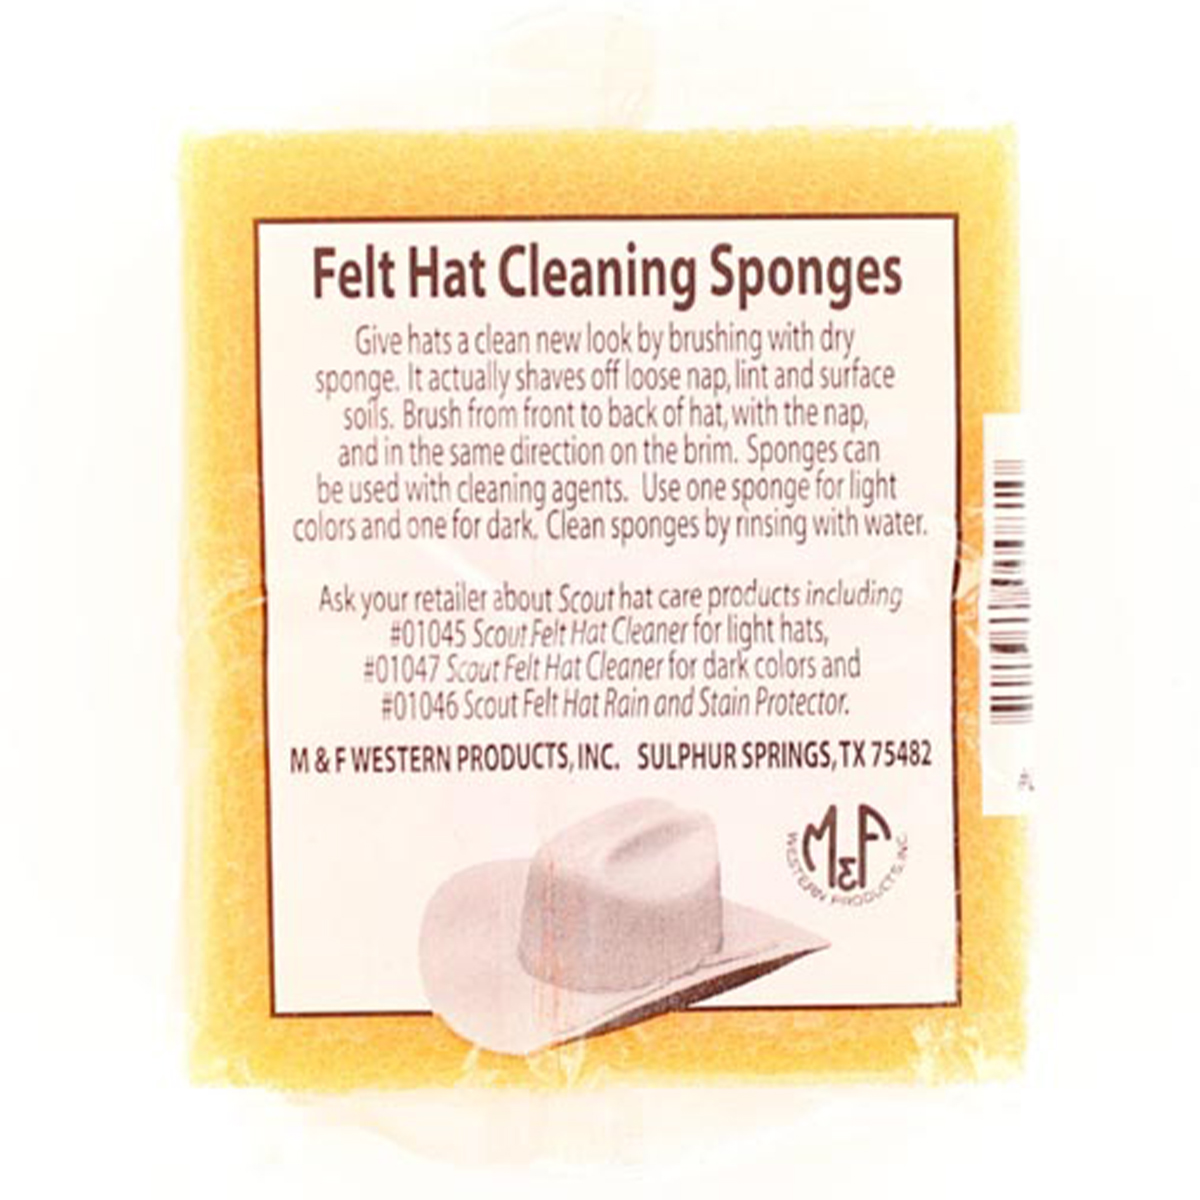 M&F Scout Felt Hat Cleaner for Dark Colors - 01047